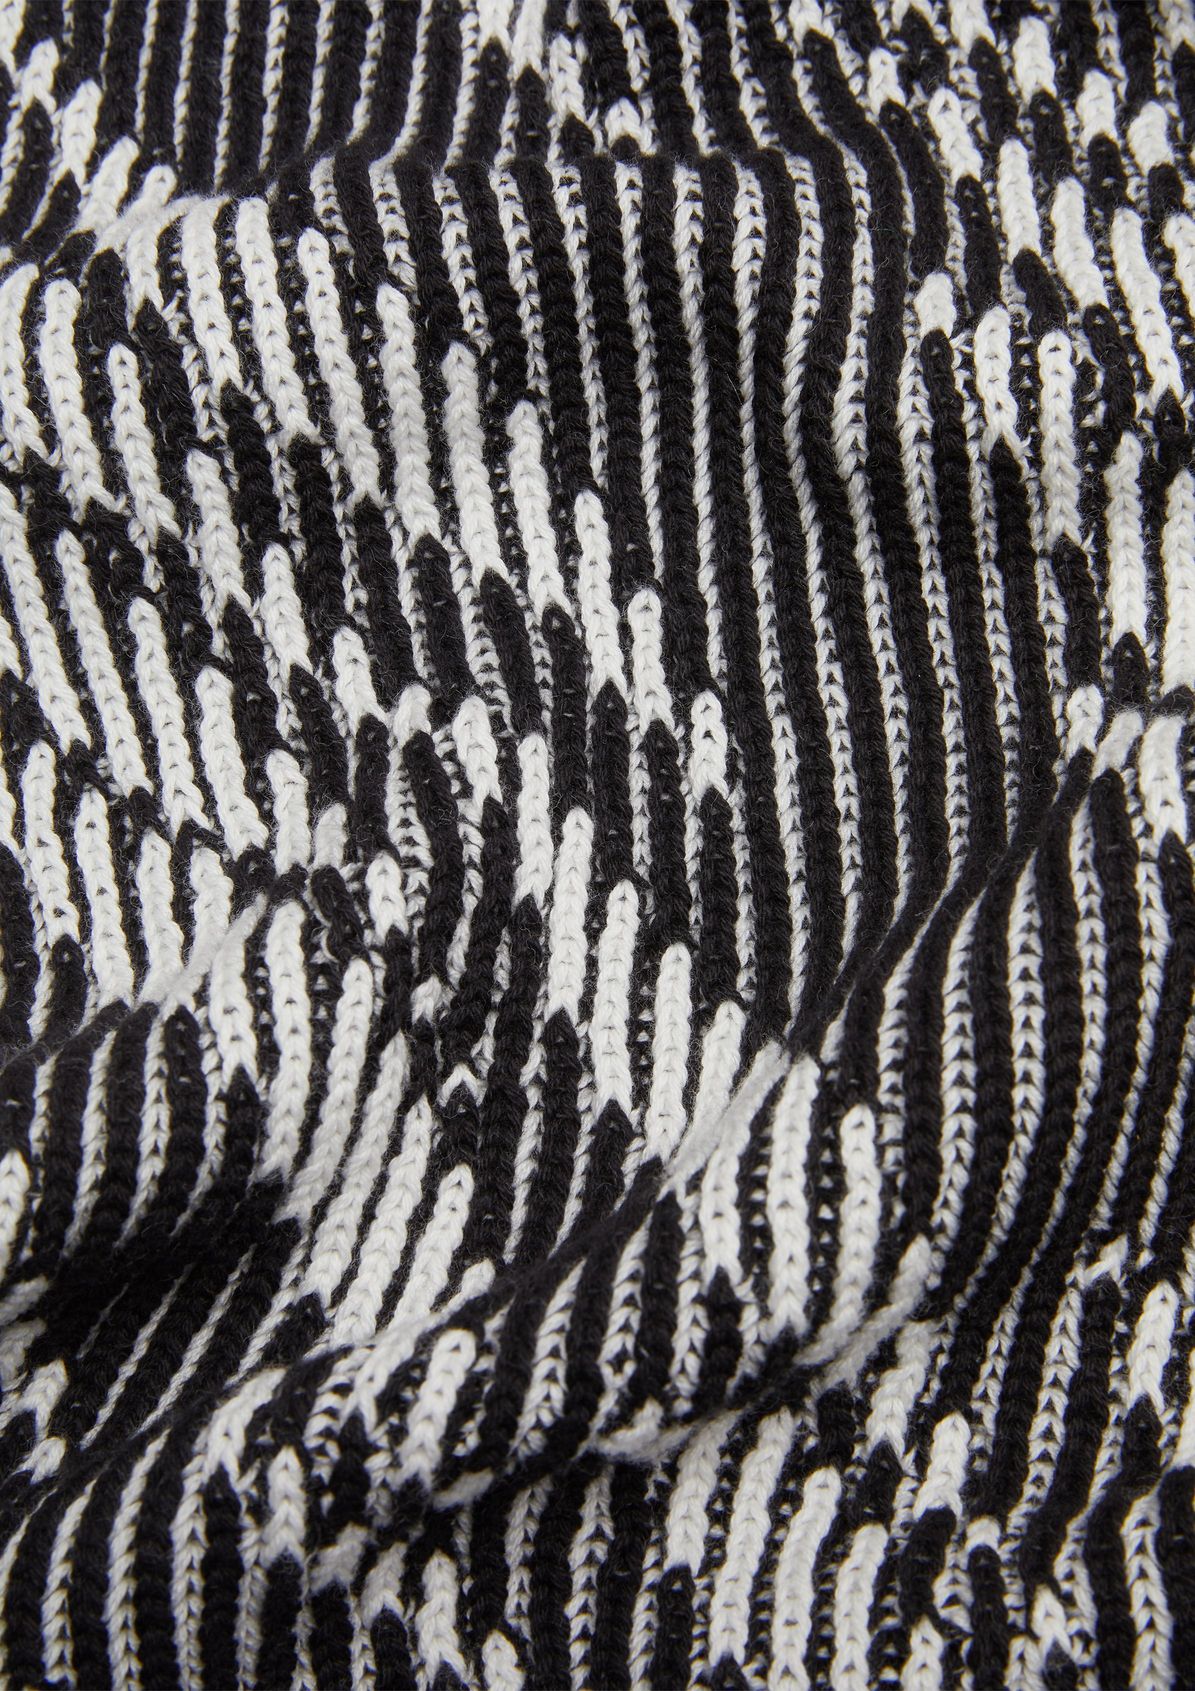 Cotton scarf with a zebra pattern from comma